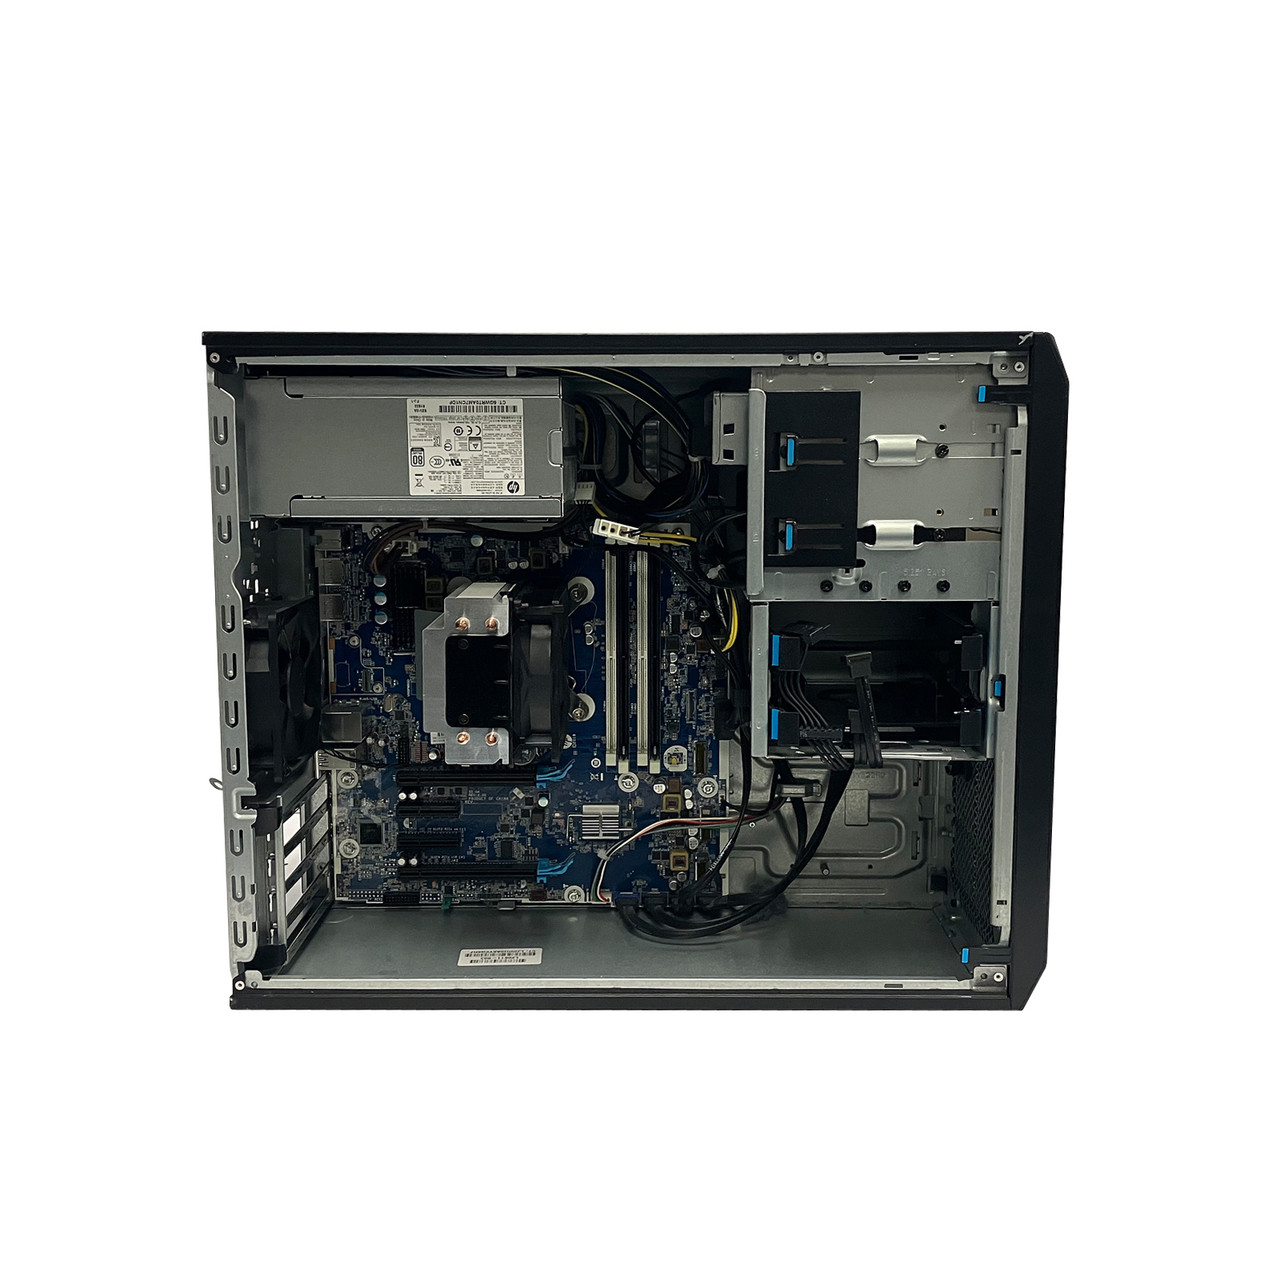 HPe Z2 G4 Tower CTO Workstation